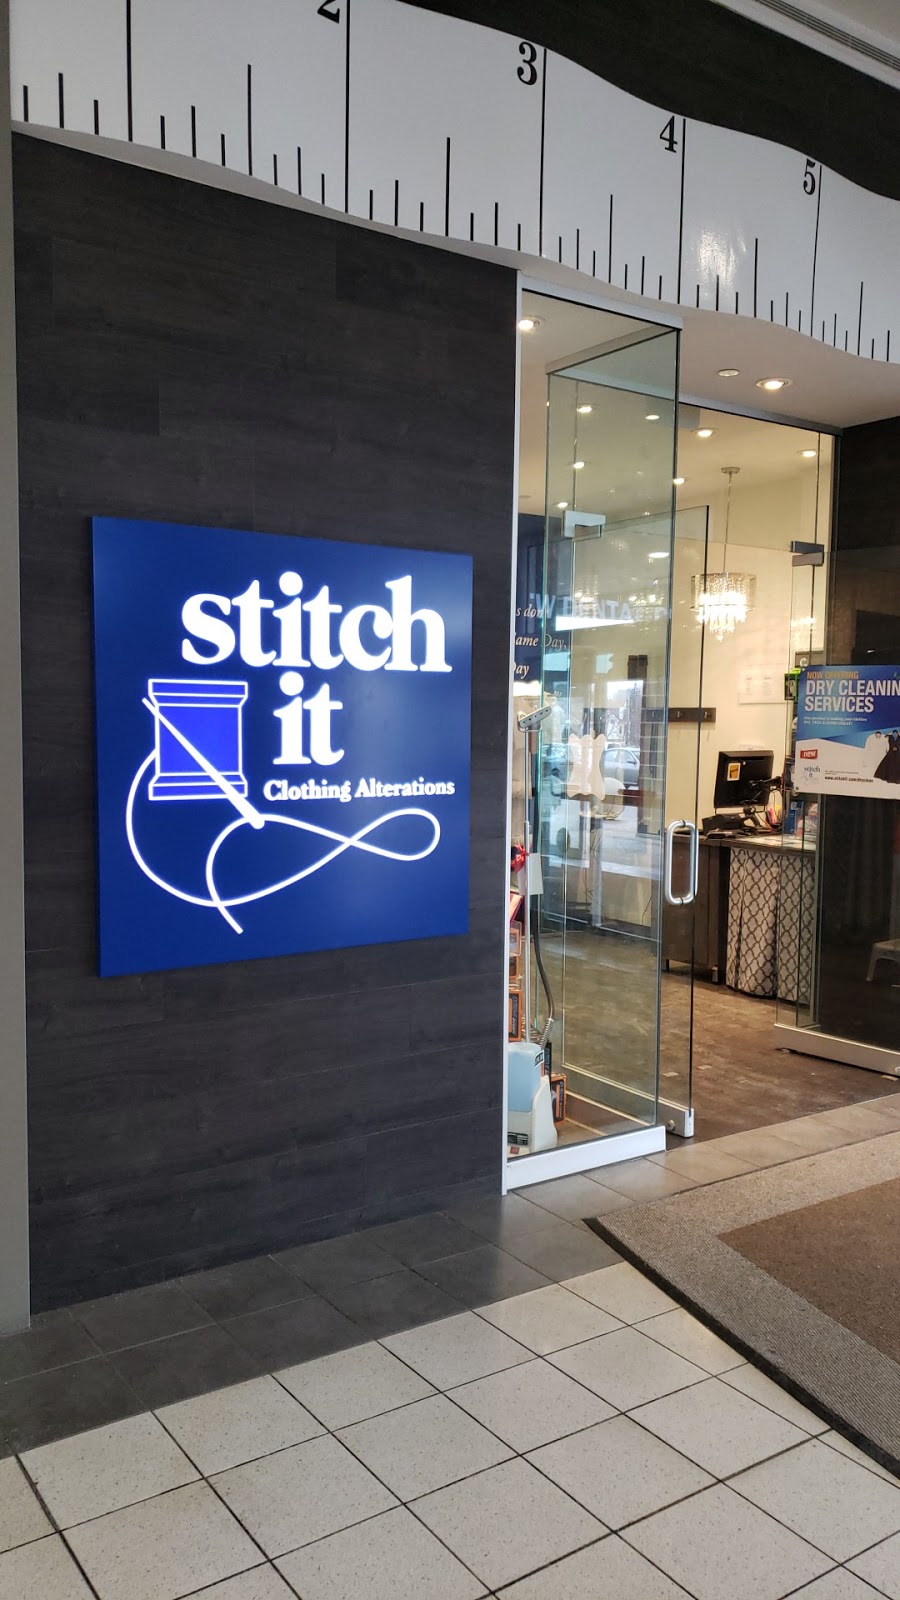 Stitch It Clothing Alterations & Dry Cleaning | laundry | 900 Maple Ave, Burlington, ON L7S 2J8, Canada | 9053334211 OR +1 905-333-4211